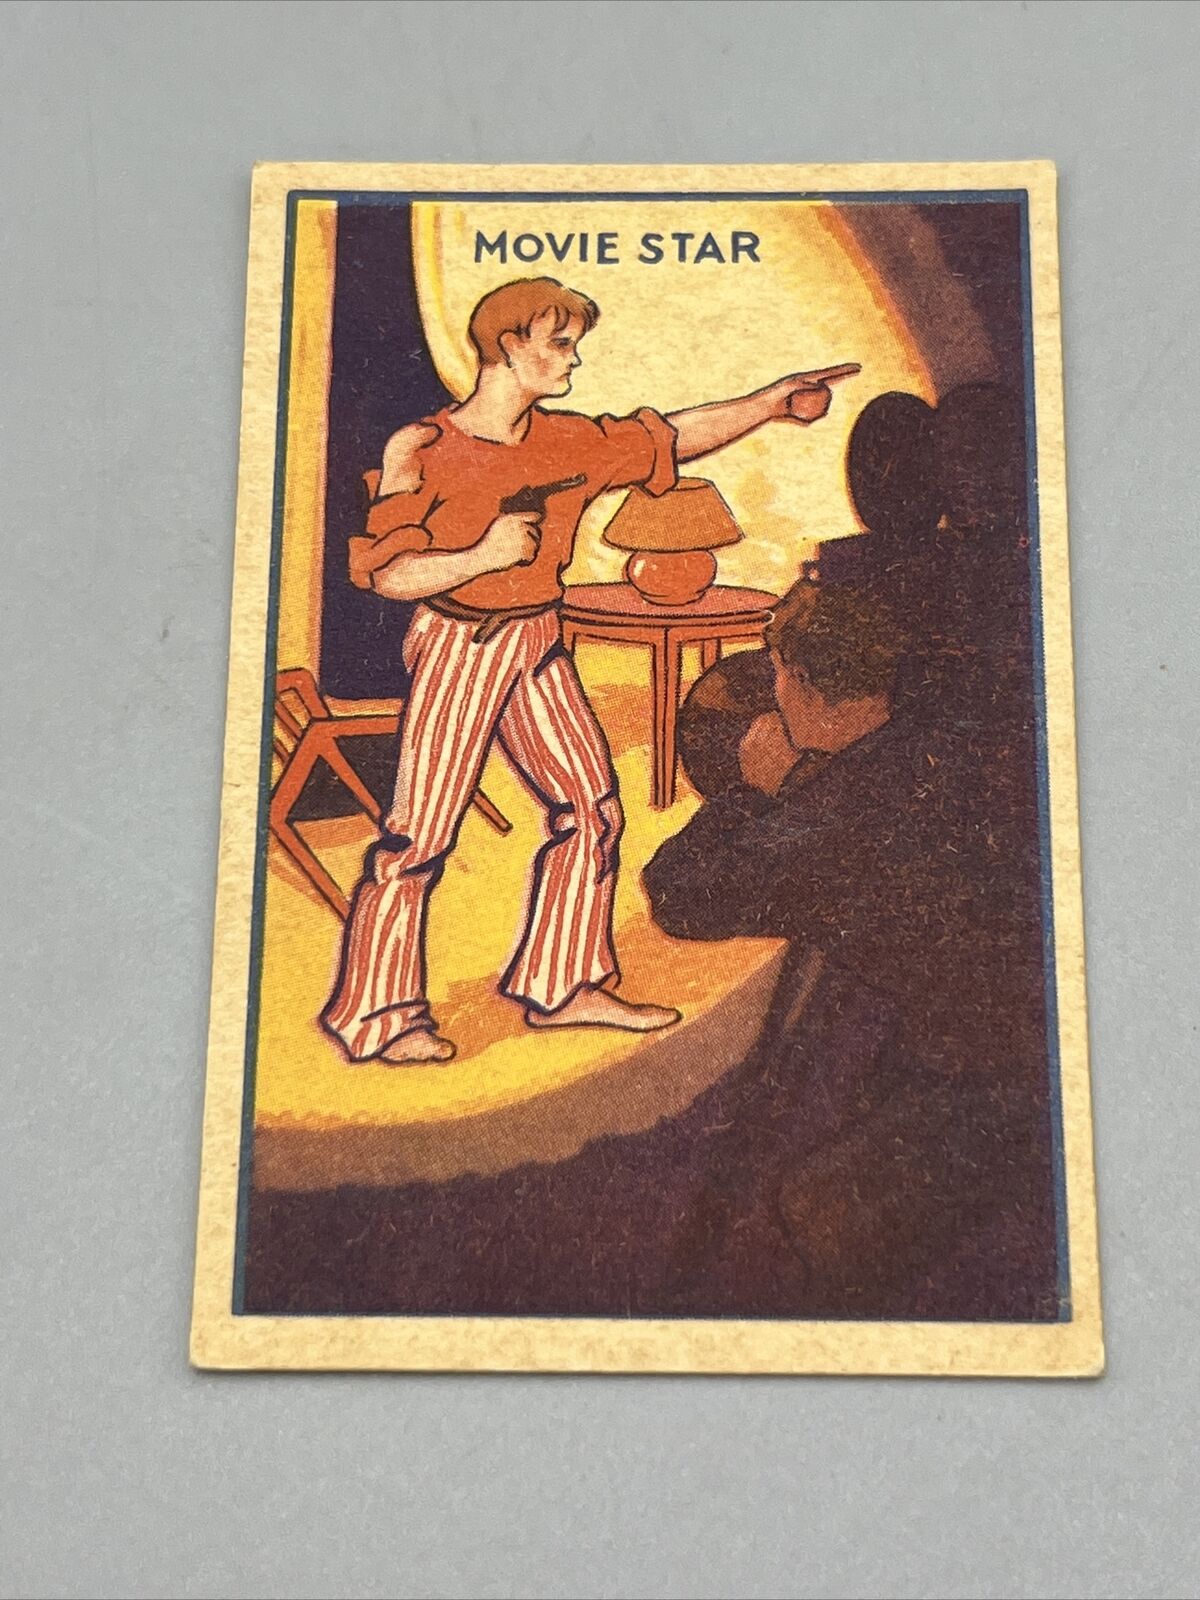 I'm Going To Be A Movie Star Schutter Johnson Candy Corp #11 R72 Vintage 1935